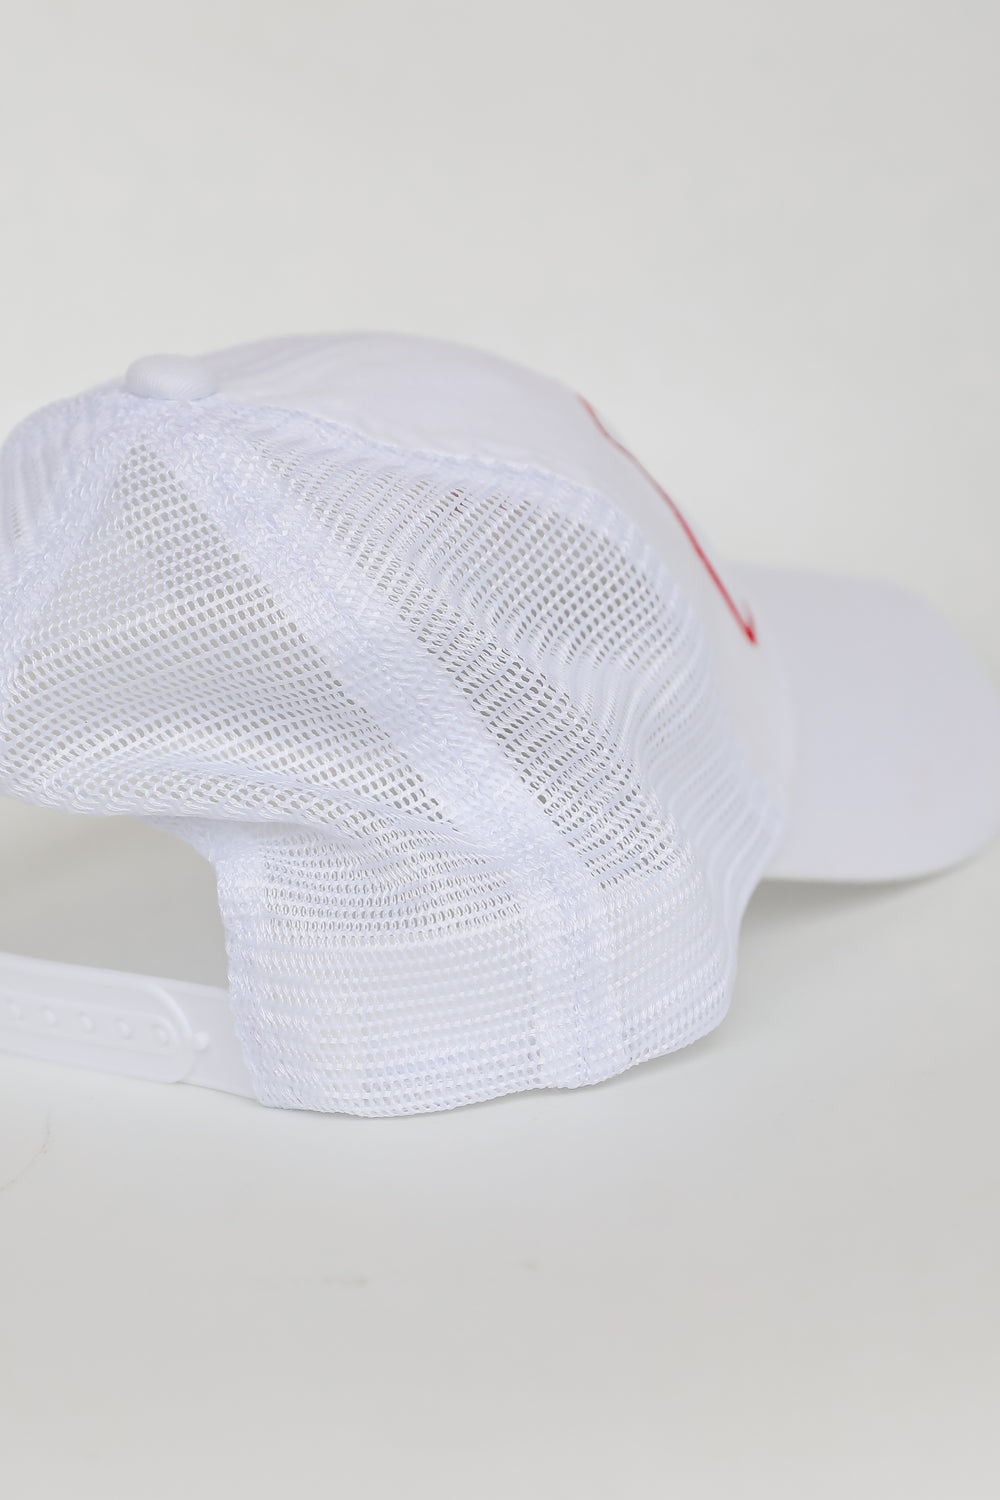 ATL Embroidered Mesh Hat back view